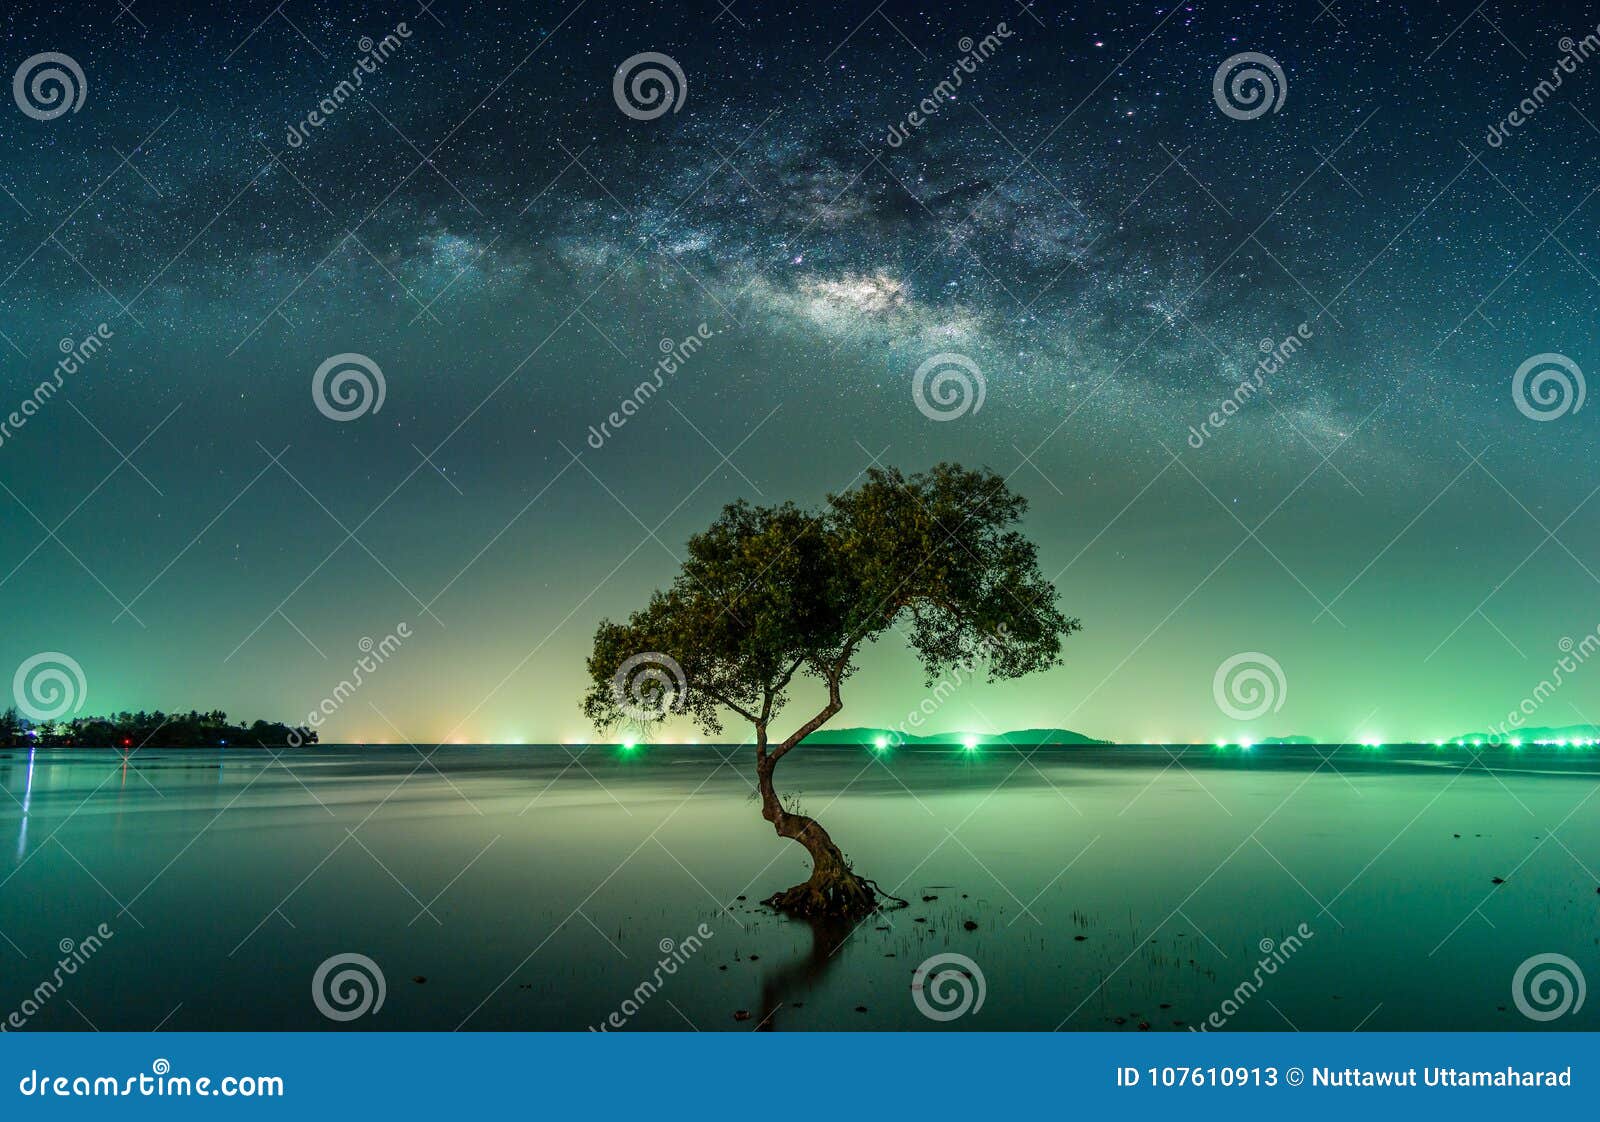 landscape with milky way galaxy. night sky with stars